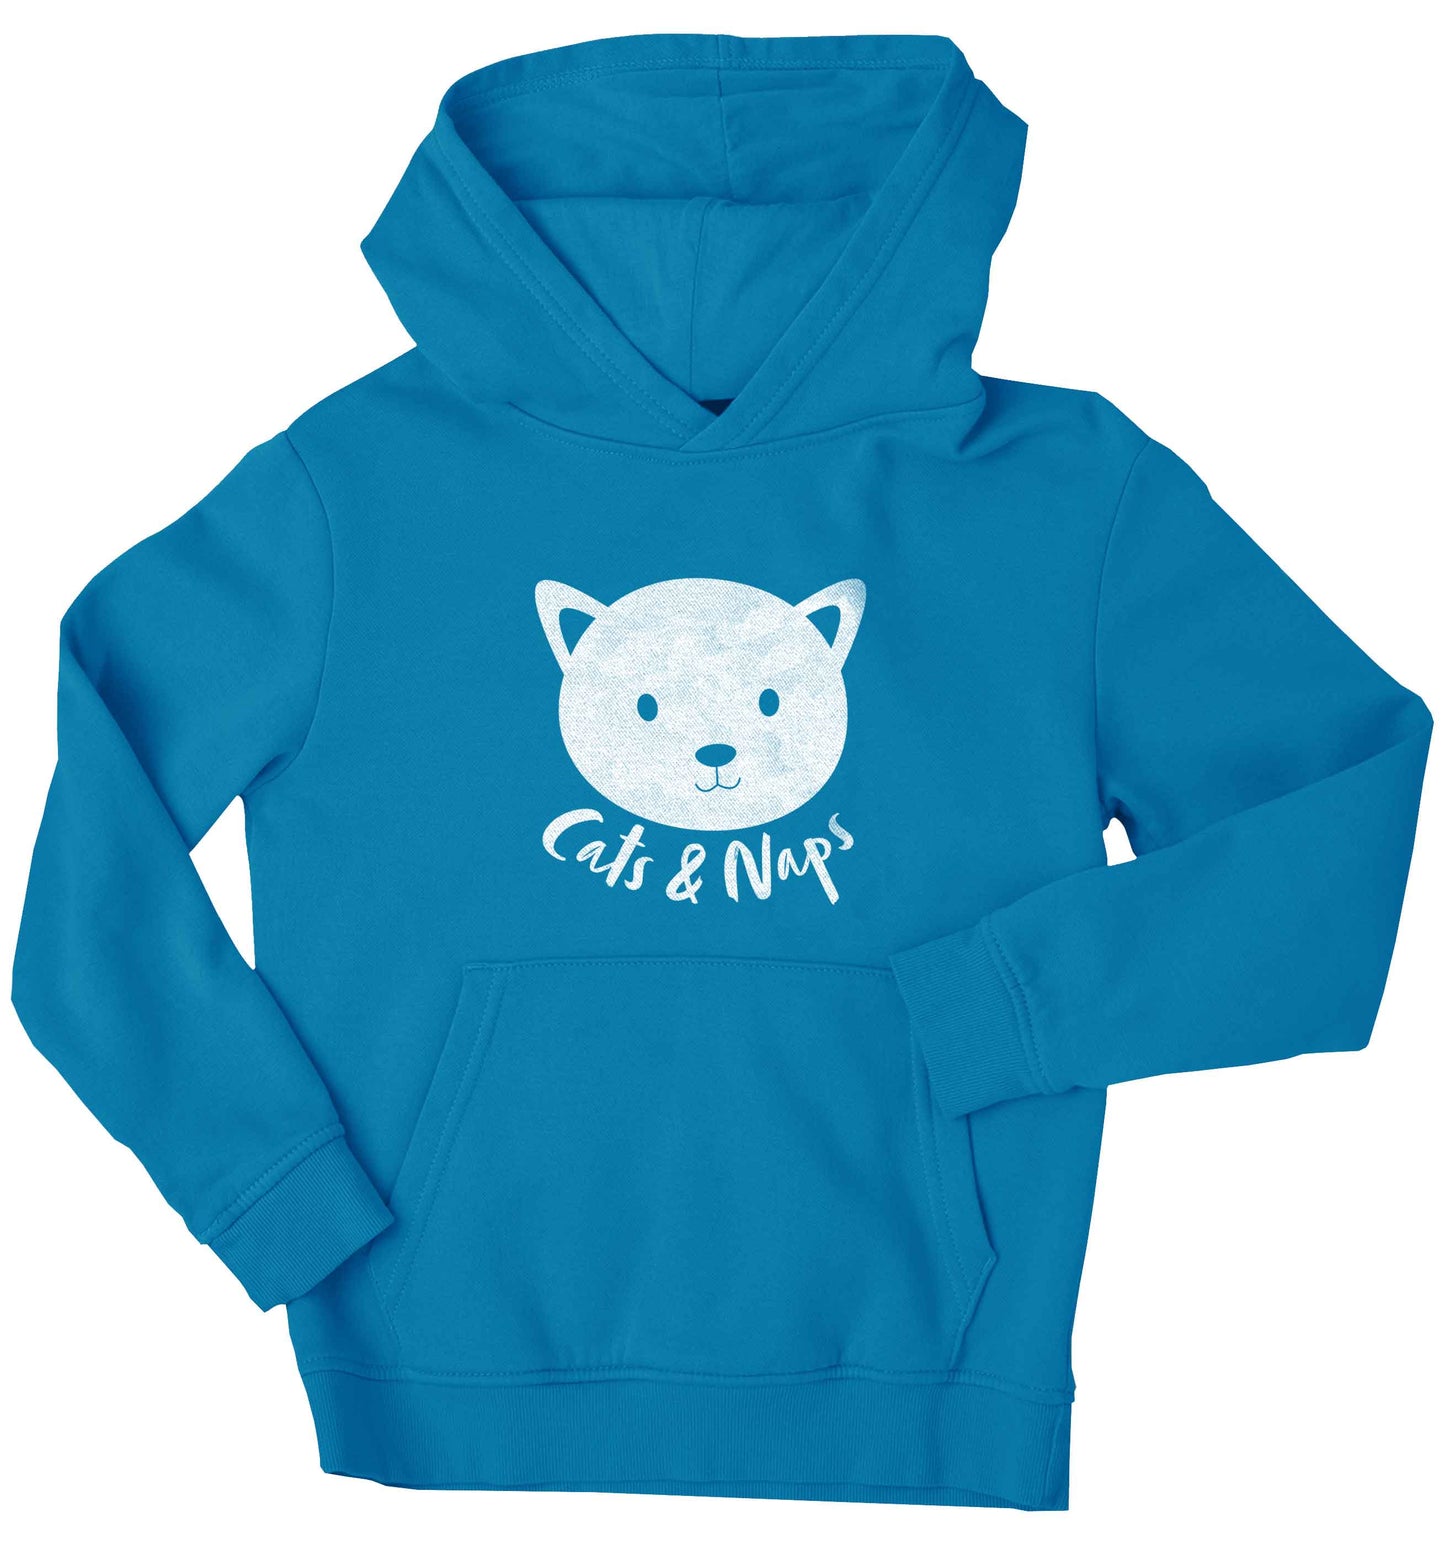 Cats and naps Kit children's blue hoodie 12-13 Years